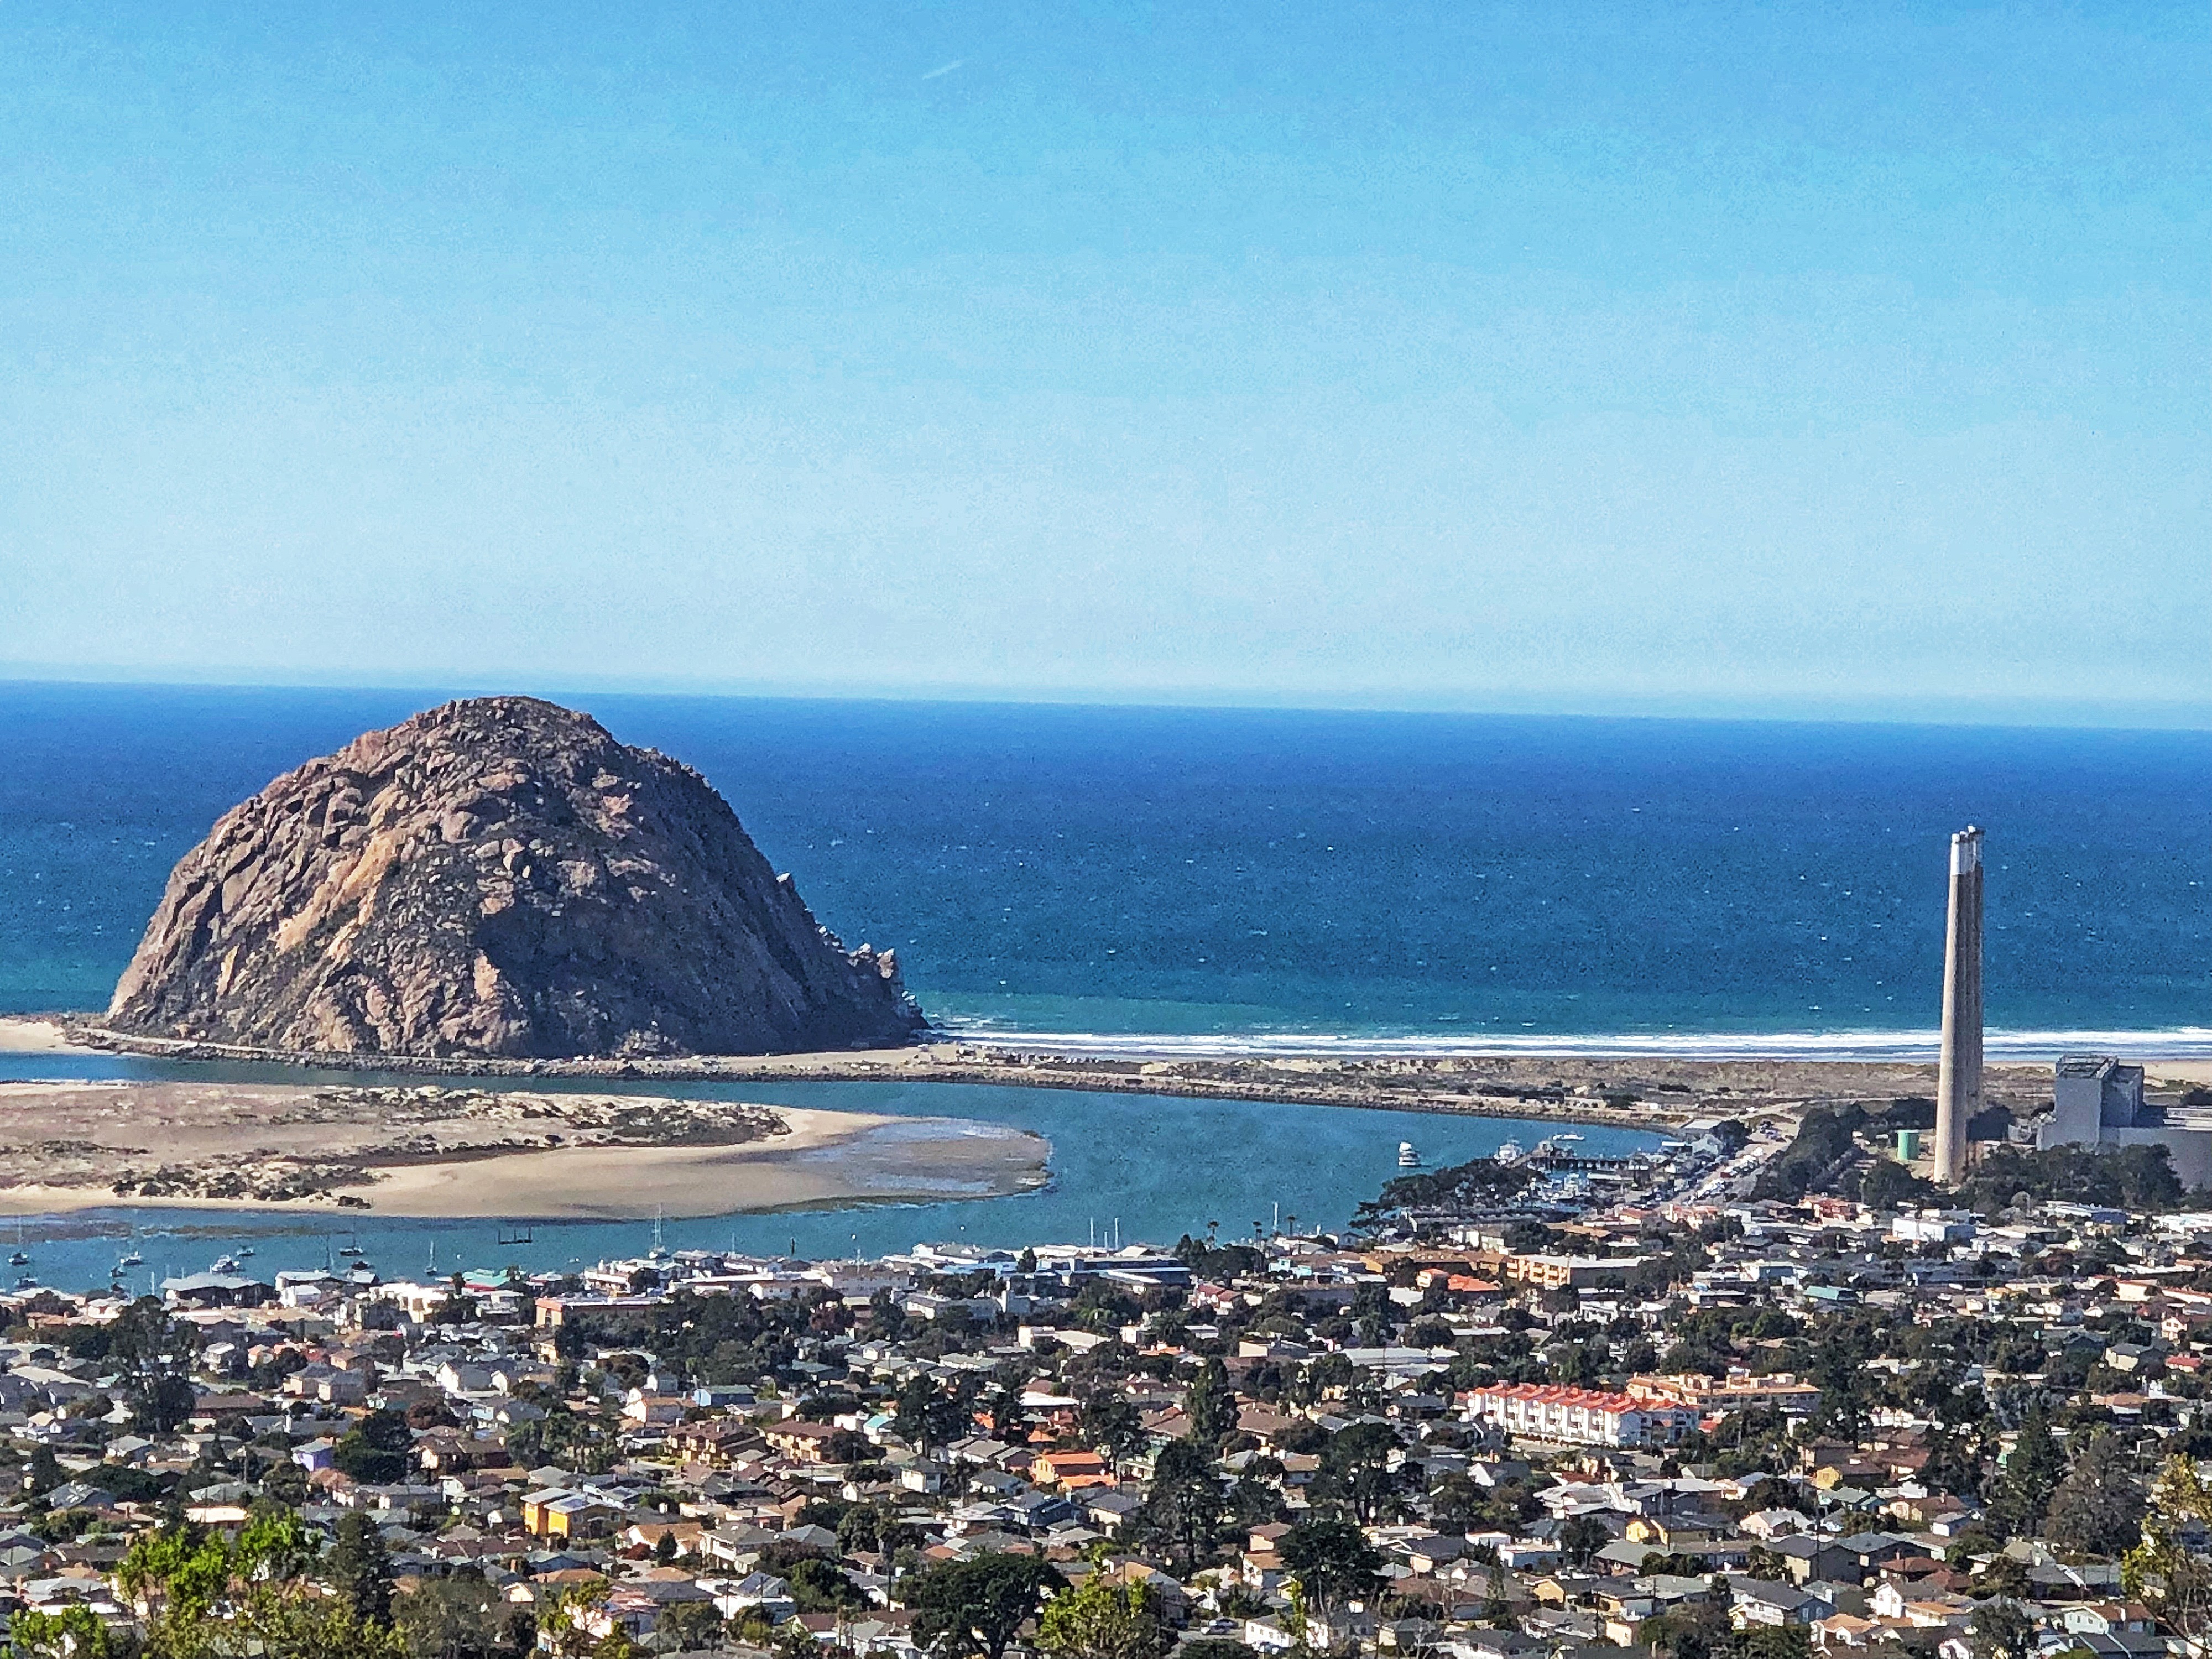 Morro Bay's Black Hill requires a minimal hike to reach amazing